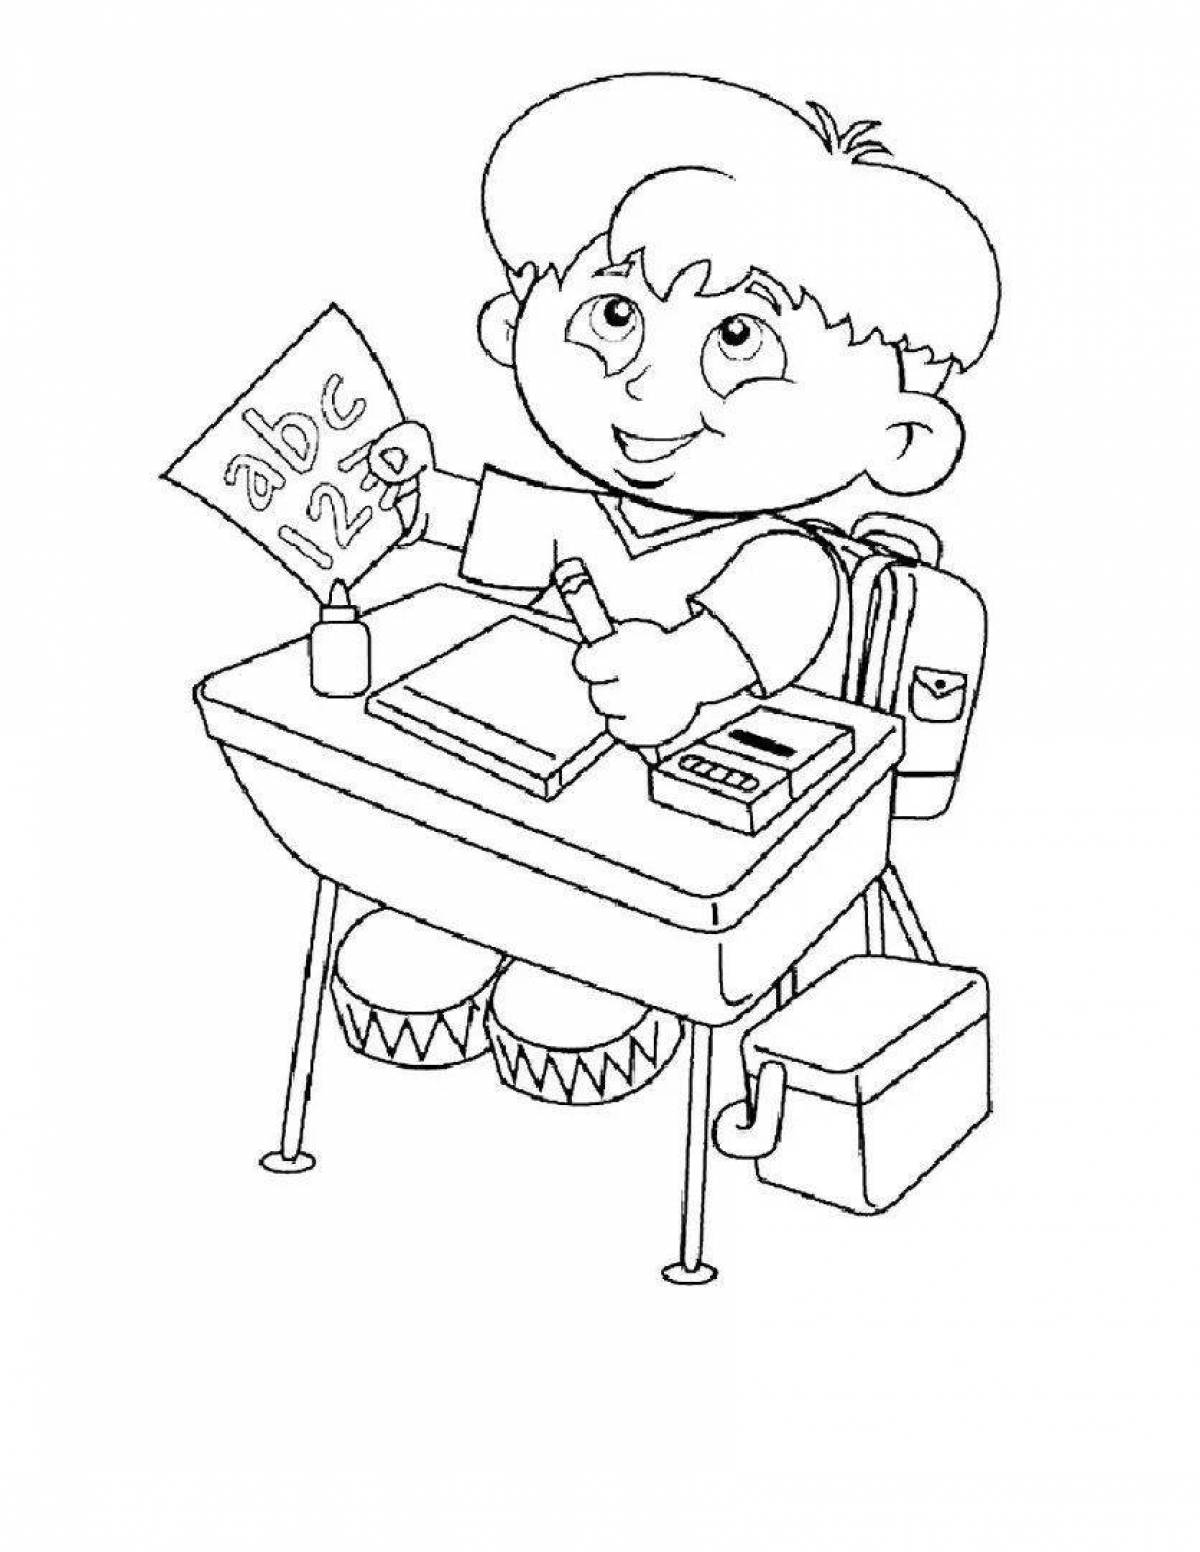 Primary school coloring book for financial literacy